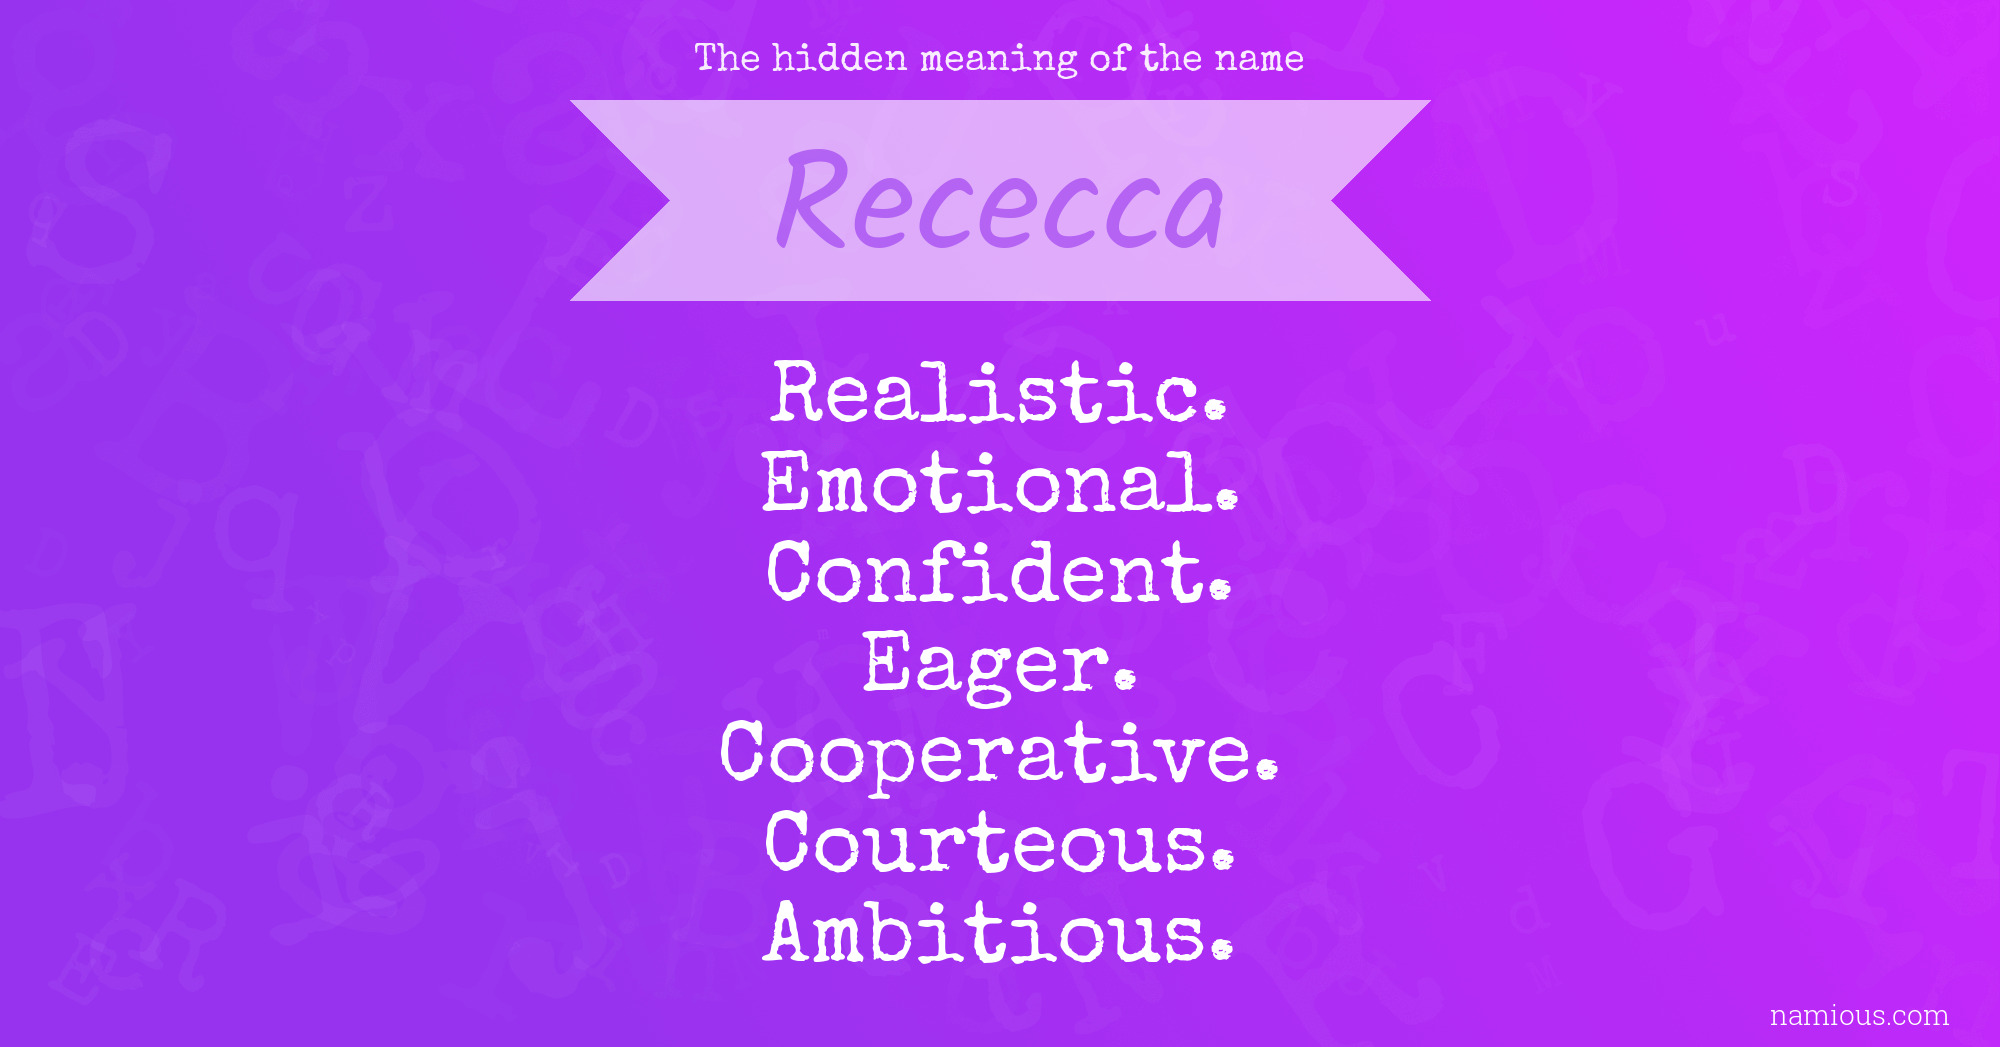 The hidden meaning of the name Rececca